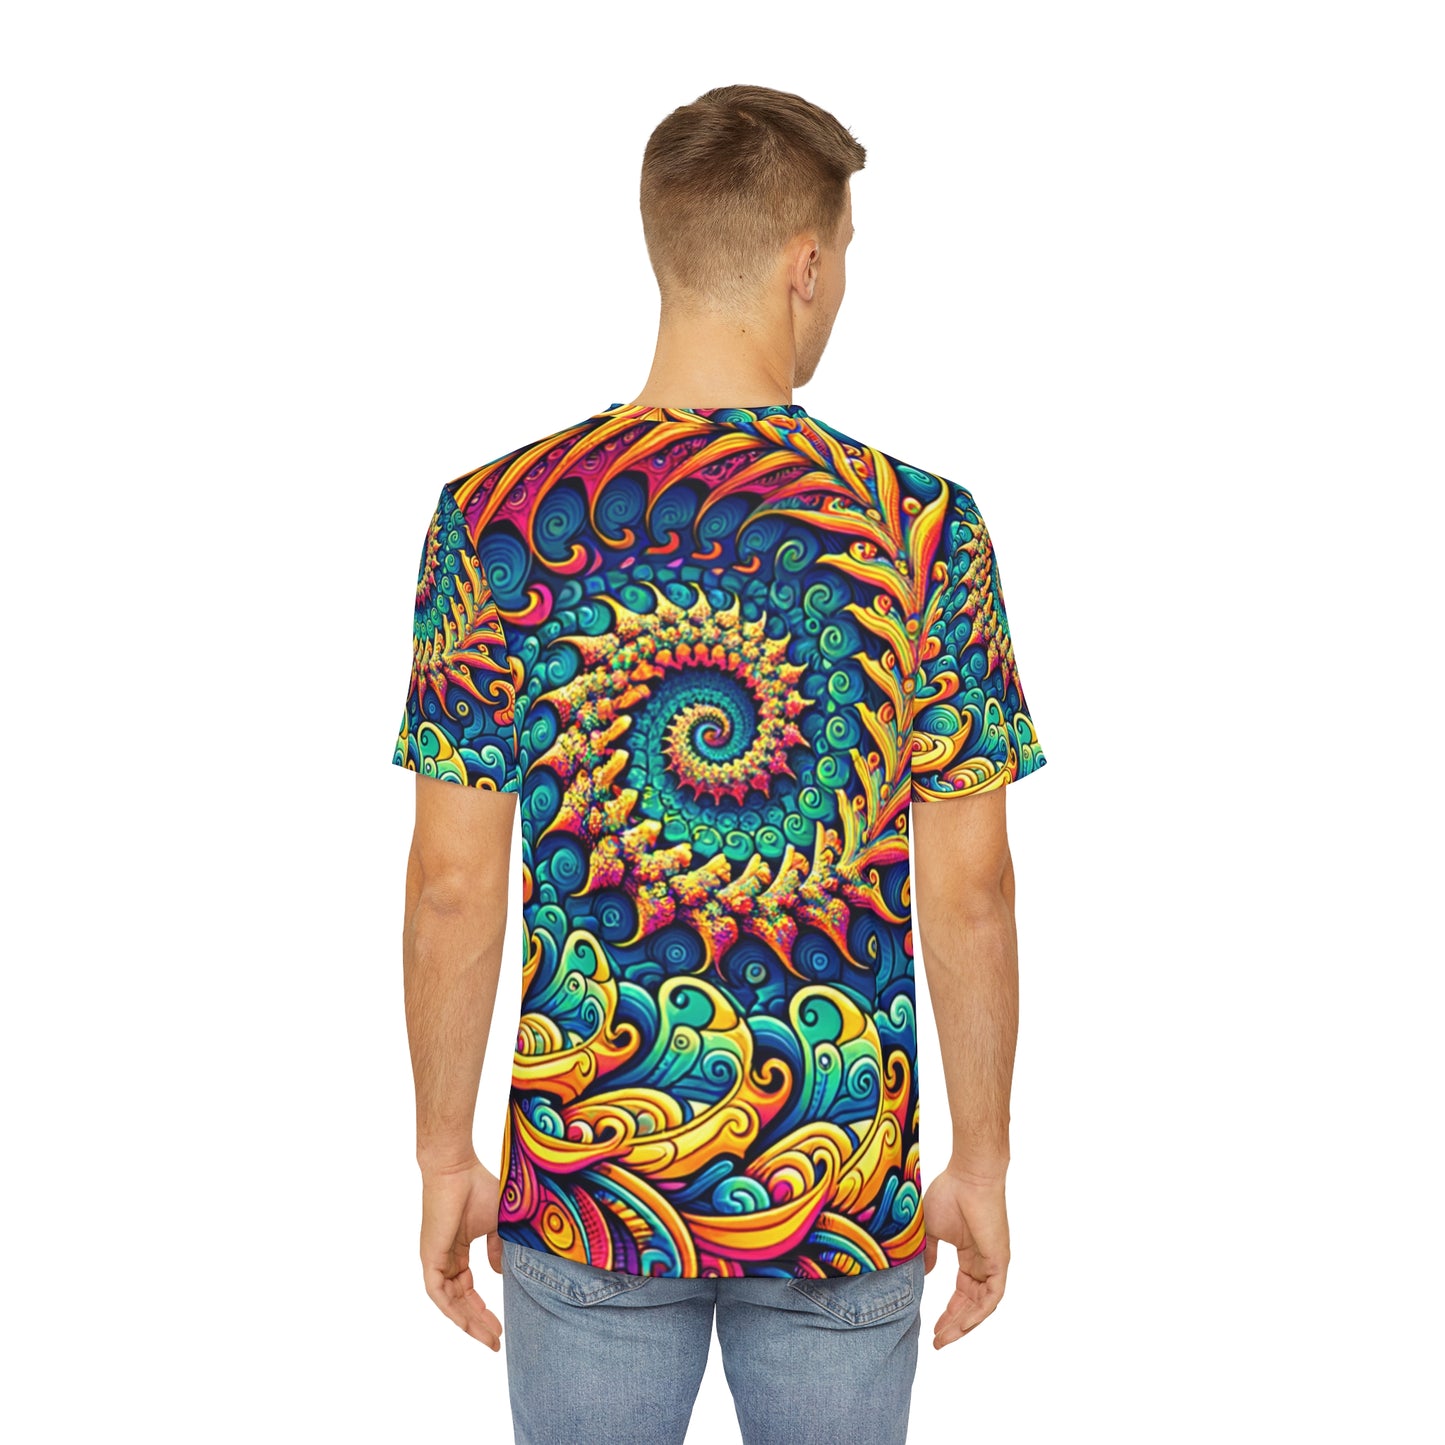 Back view of the Psychedelic Peacock Swirls Crewneck Pullover All-Over Print Short-Sleeved Shirt yellow blue green red peacock swirl pattern  paired with casual denim pants worn by a white man